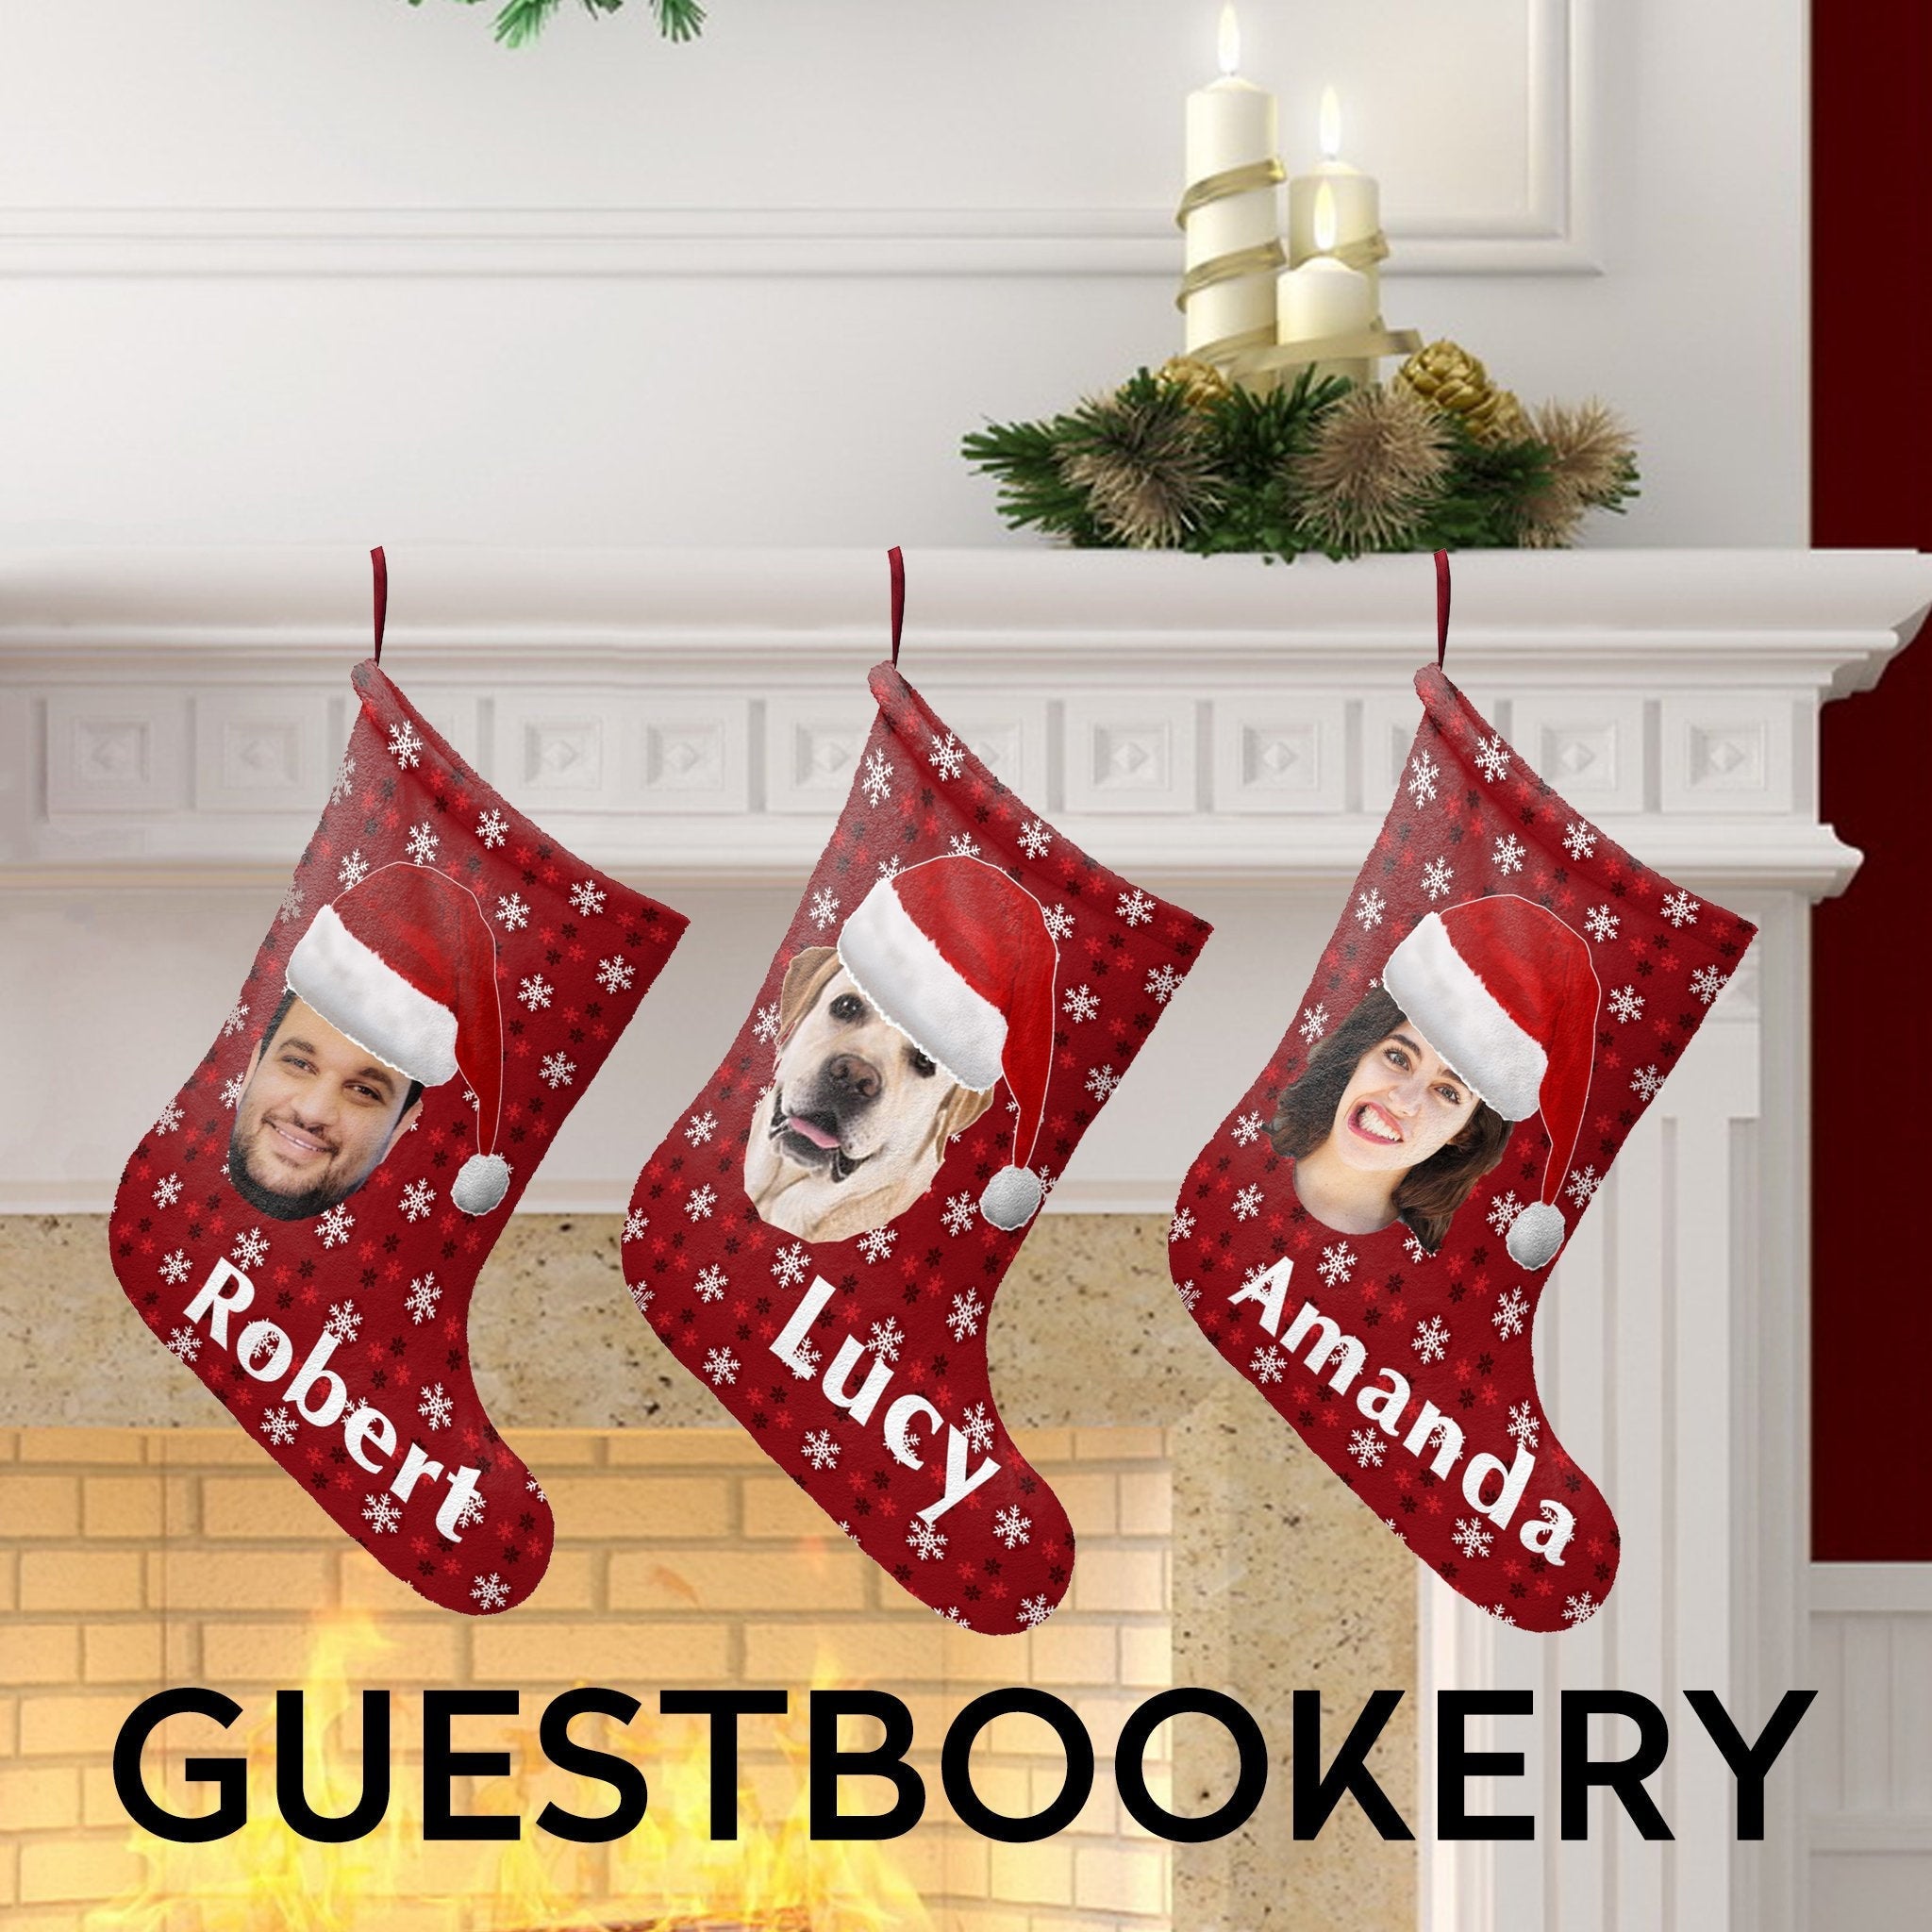 Custom Faces Christmas Stockings Set - Guestbookery